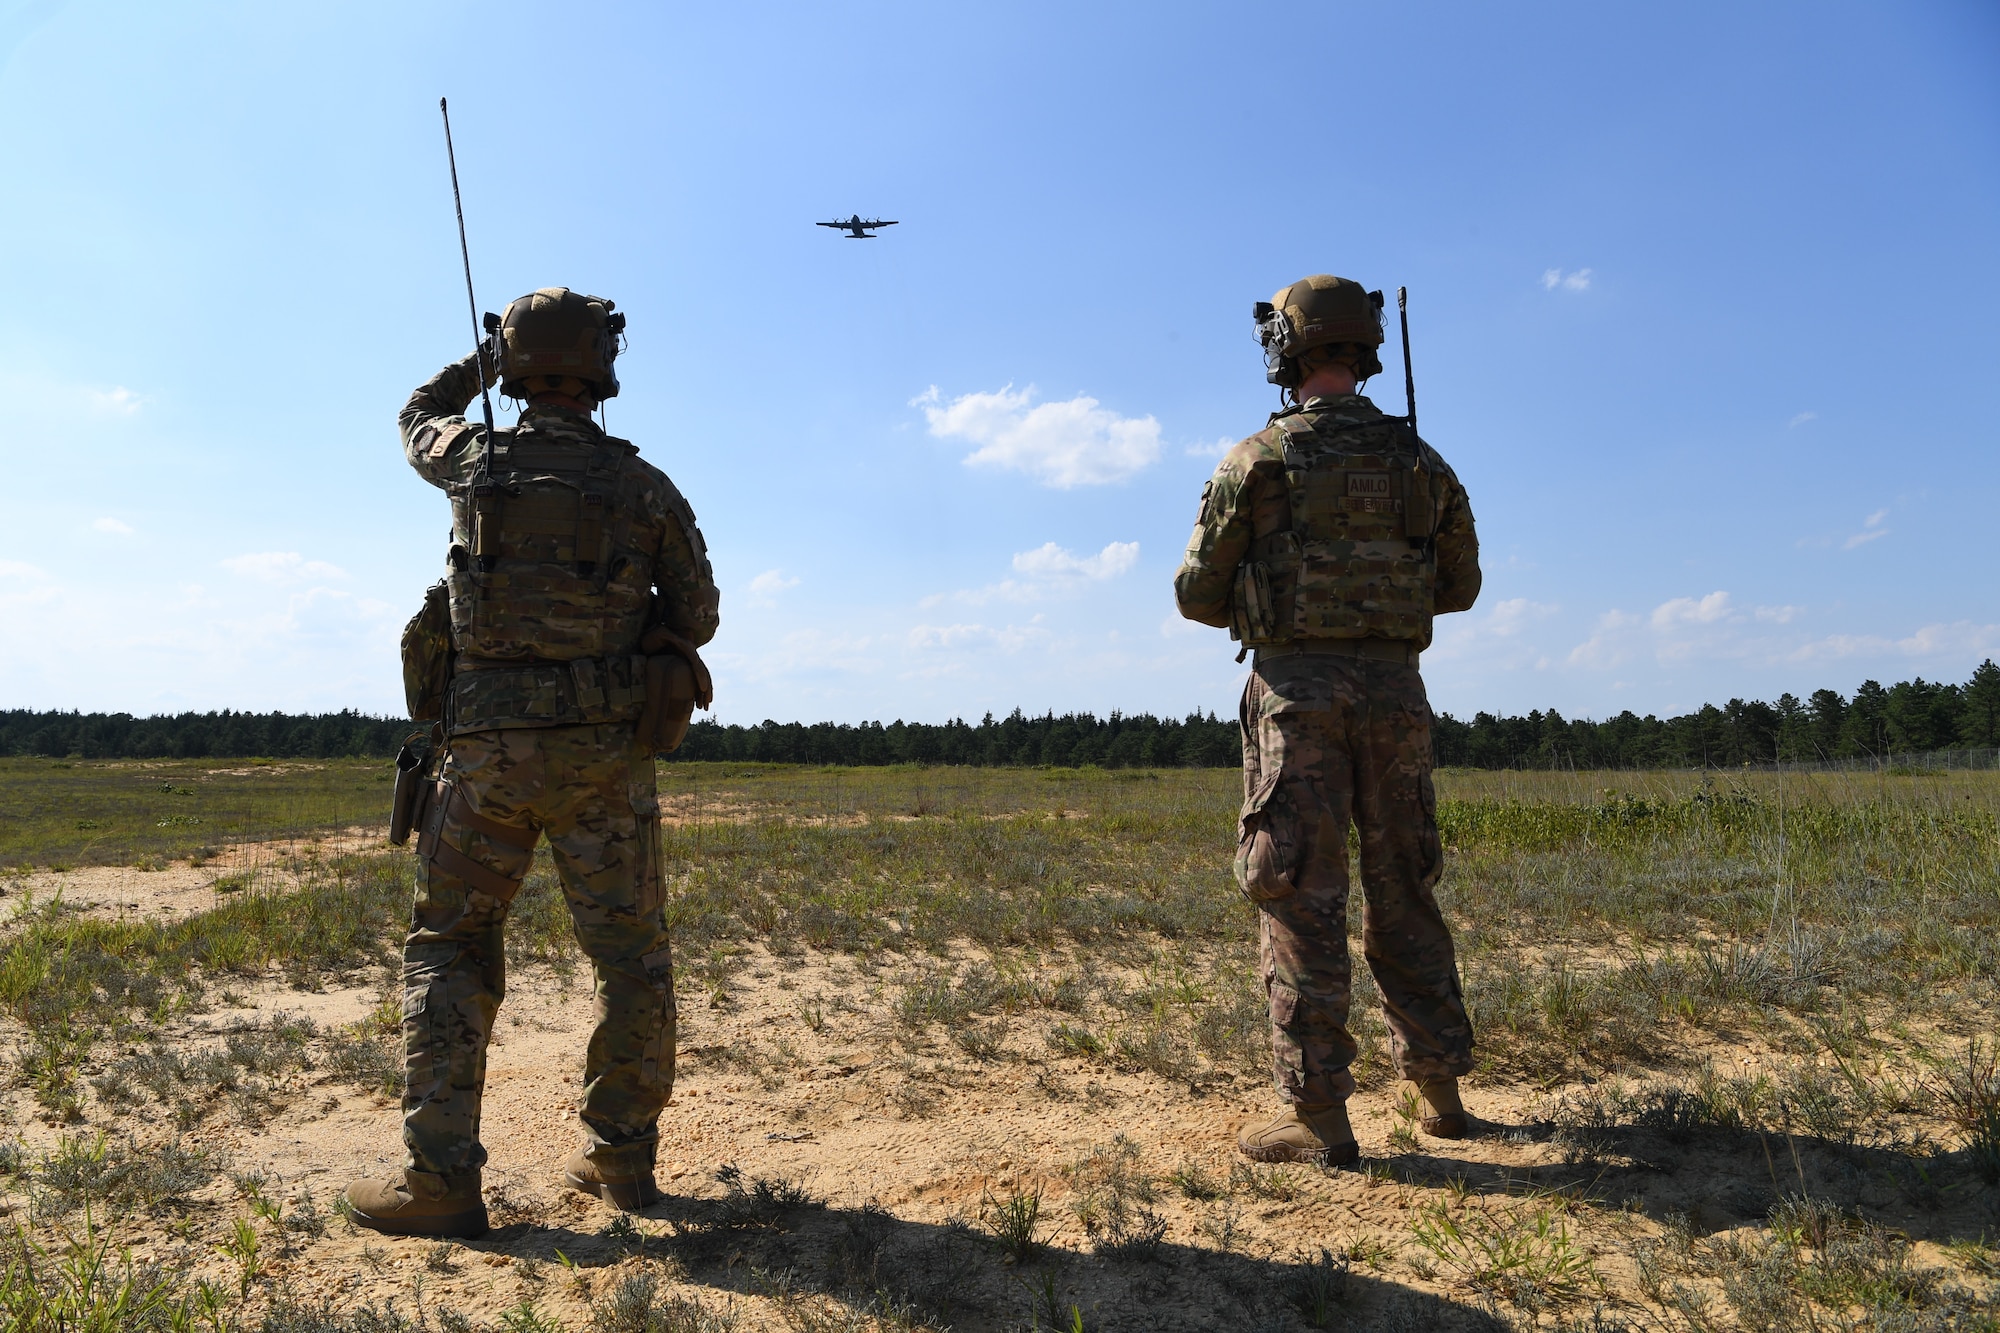 Capt. David Chan, 621st Mobility Support Operations Squadron Air Mobility Liaison Officer, and Maj. Clark Beesemyer, 621st MSOS AMLO, conduct drop zone and landing zone operations refresher training at Joint Base McGuire-Dix-Lakehurst, New Jersey, July 21, 2020. The 621st MSOS Summit is mission-essential training held biannually to ensure full-spectrum readiness.